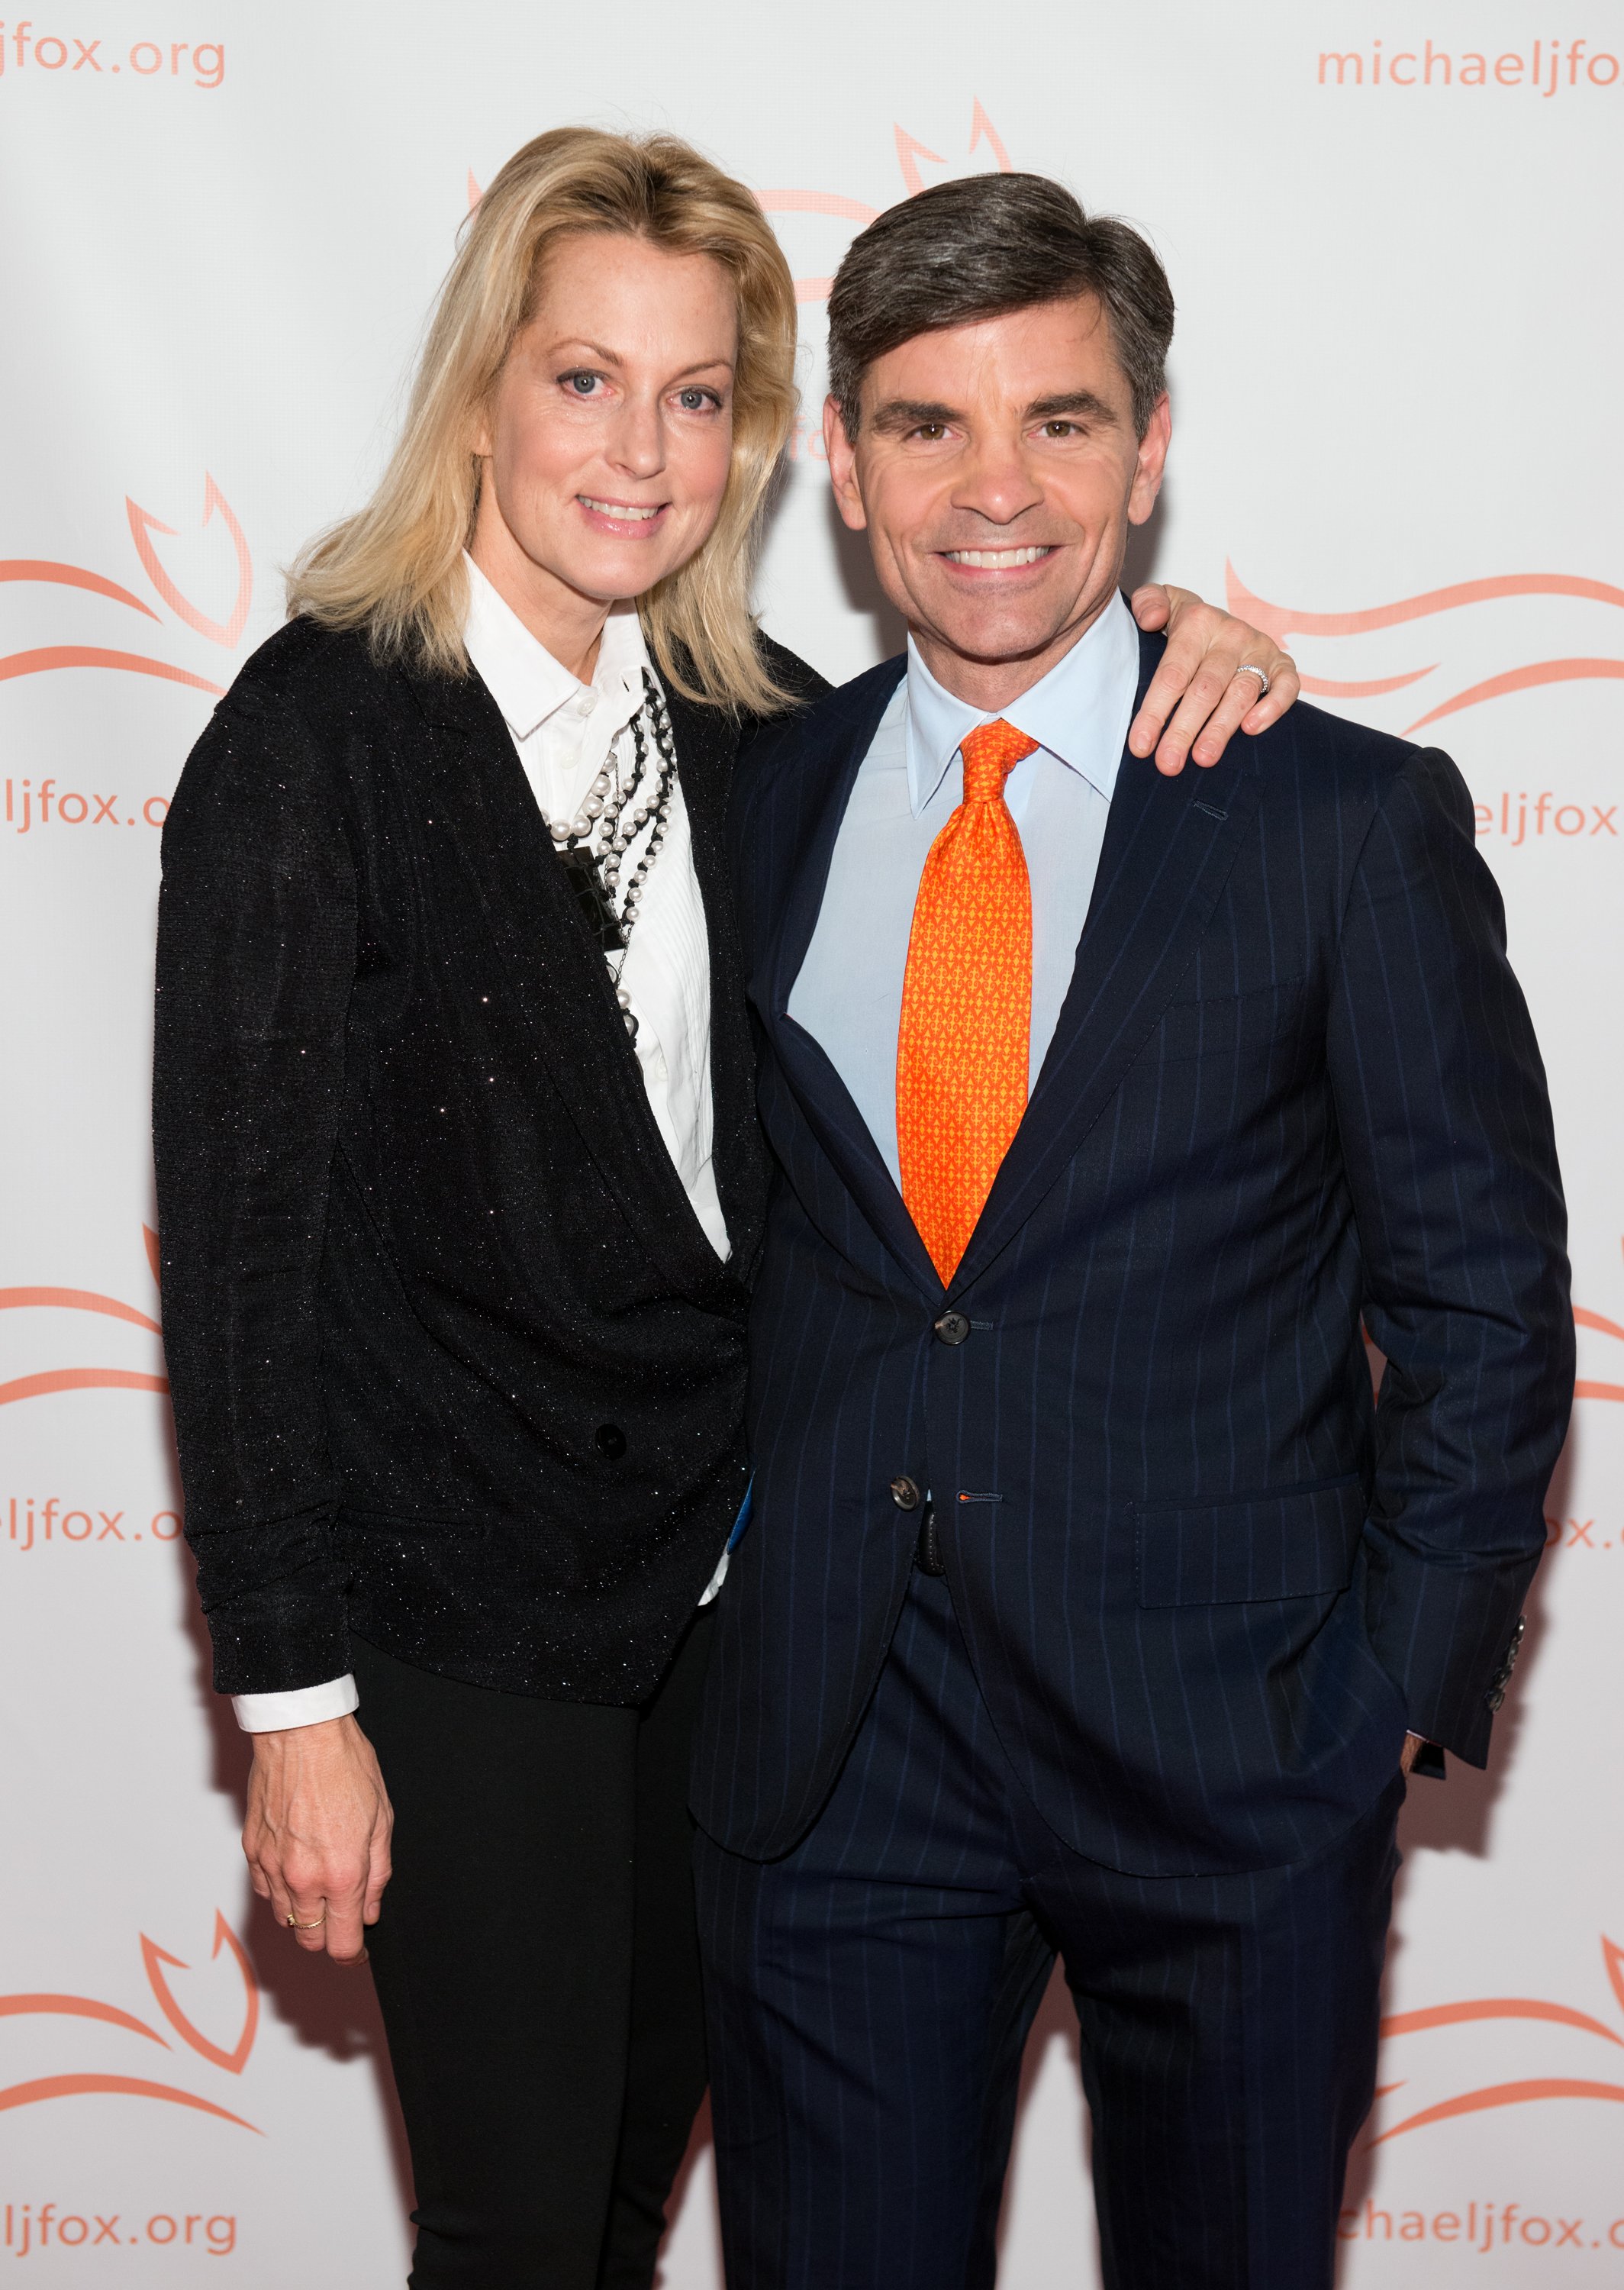 Ali Wentworth and George Stephanopoulos attend the Michael J. Fox Foundation's "A Funny Thing Happened On The Way To Cure Parkinson's" Gala on November 14, 2015, in New York City. | Source: Getty Images.